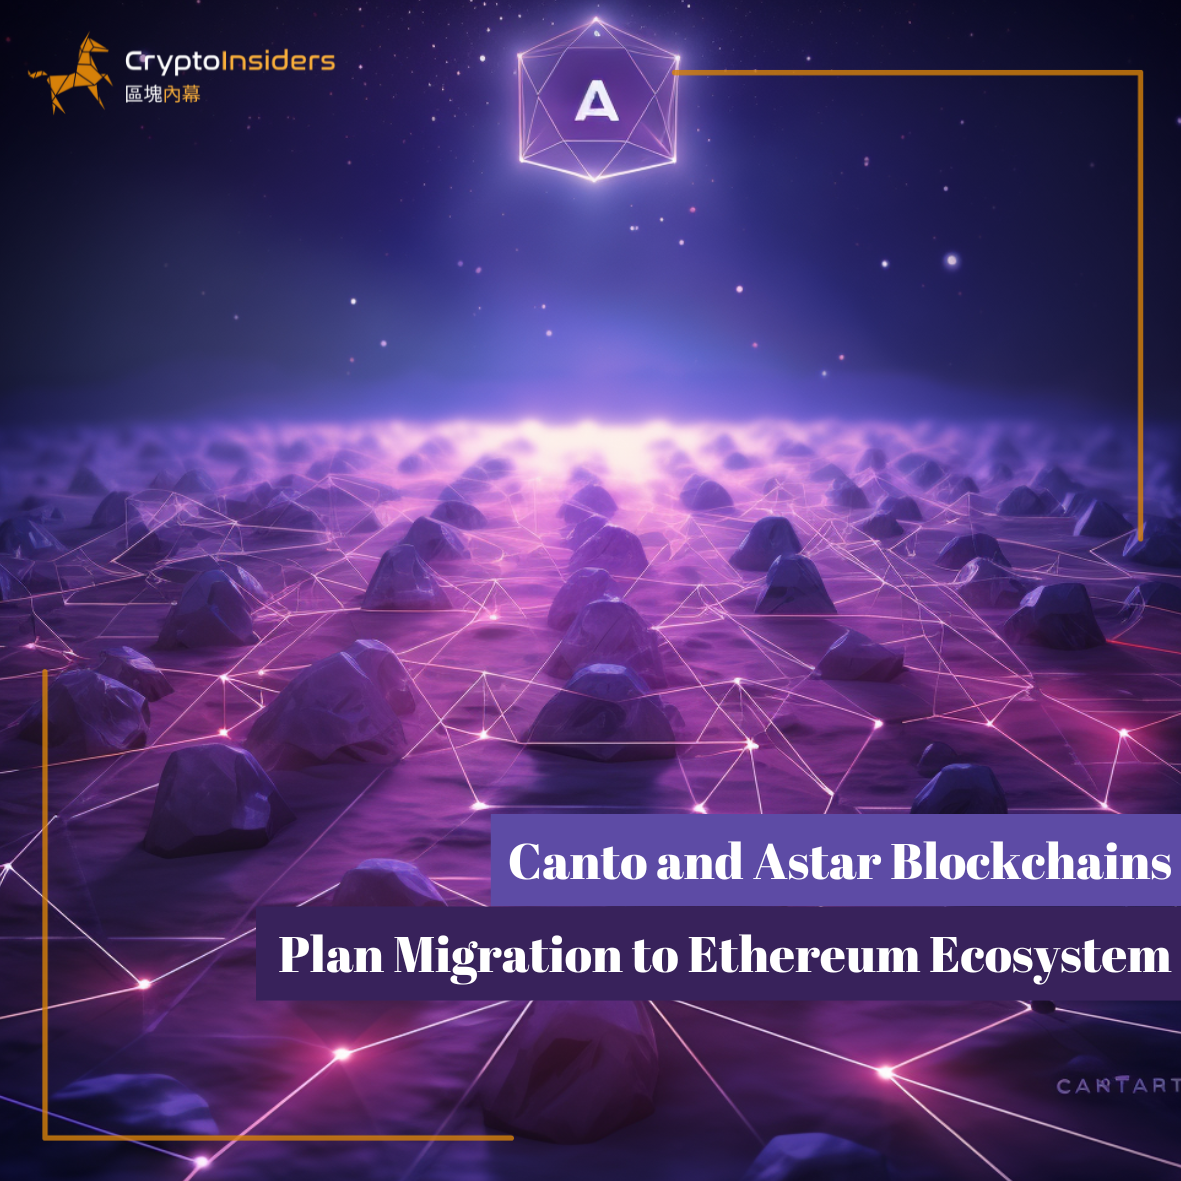 Canto-and-Astar-Blockchains-Plan-Migration-to-Ethereum-Ecosystem-Crypto-Insiders-Hong-Kong-Blockchain-News